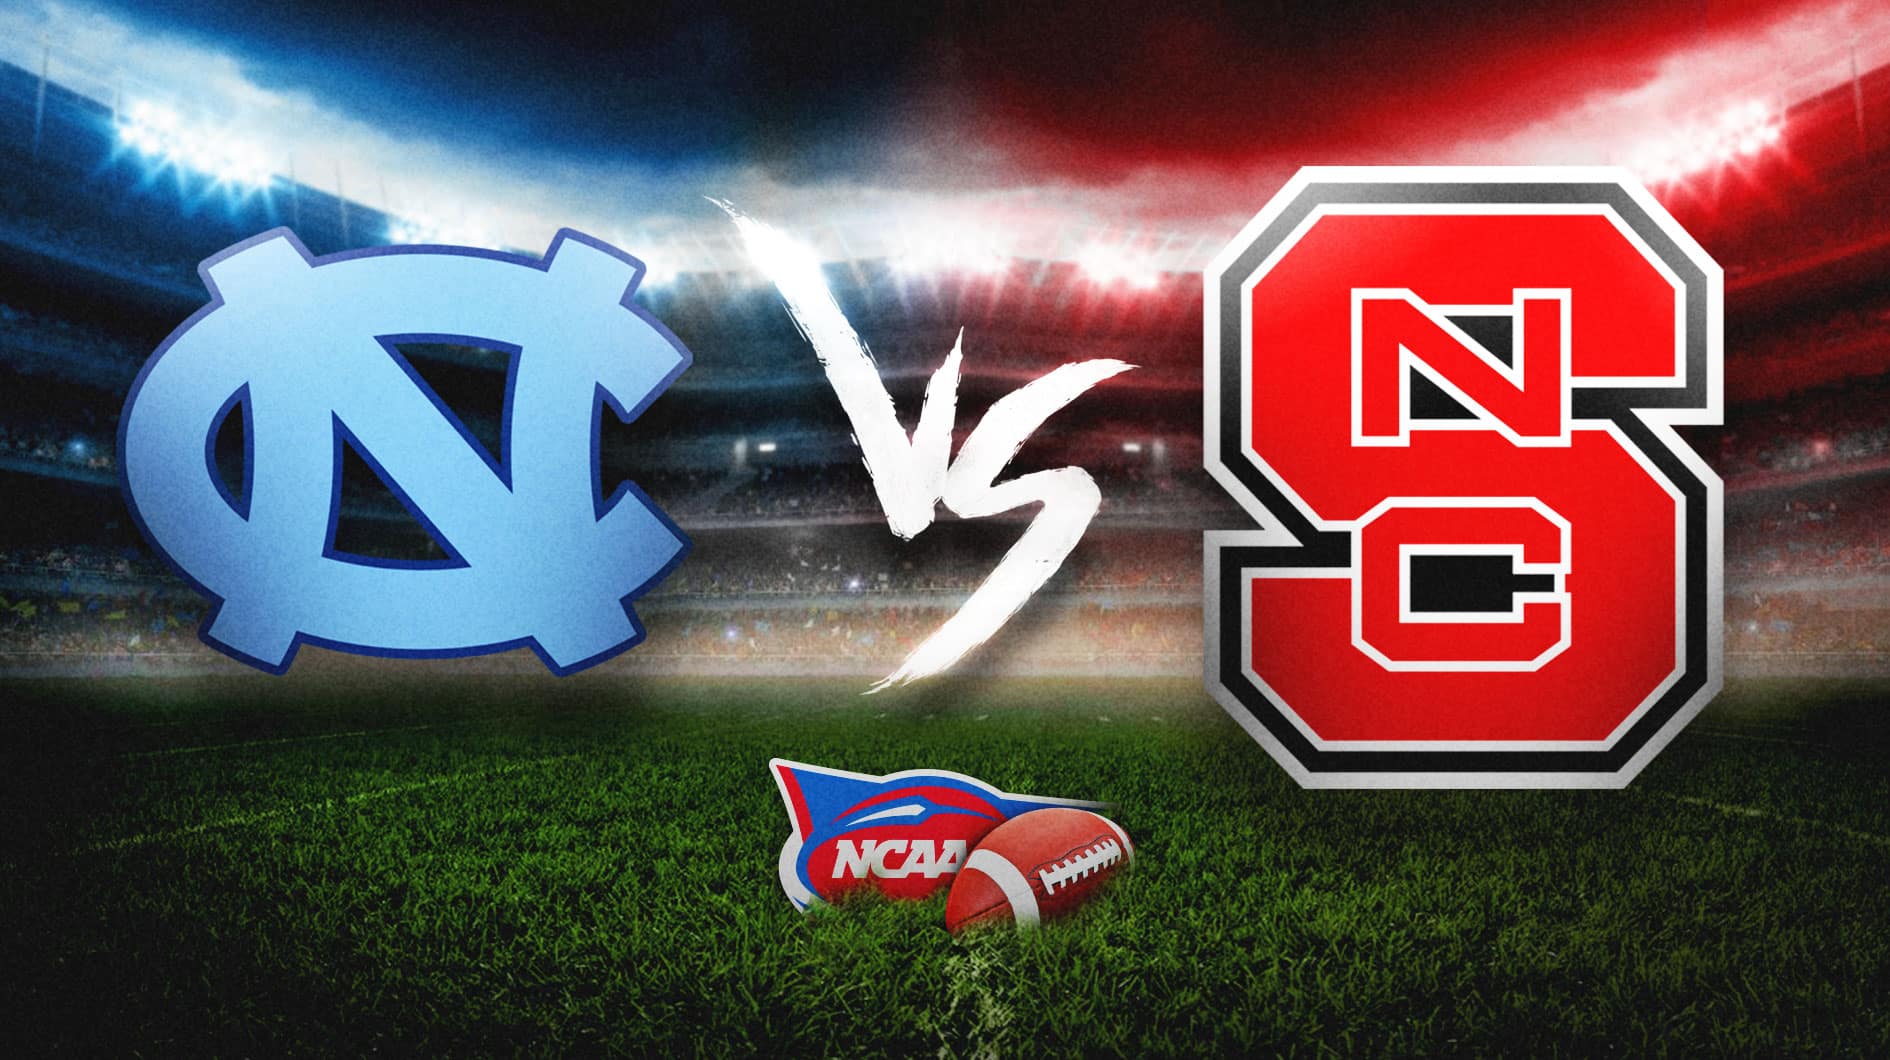 North Carolina vs NC State prediction, odds, pick, how to watch college